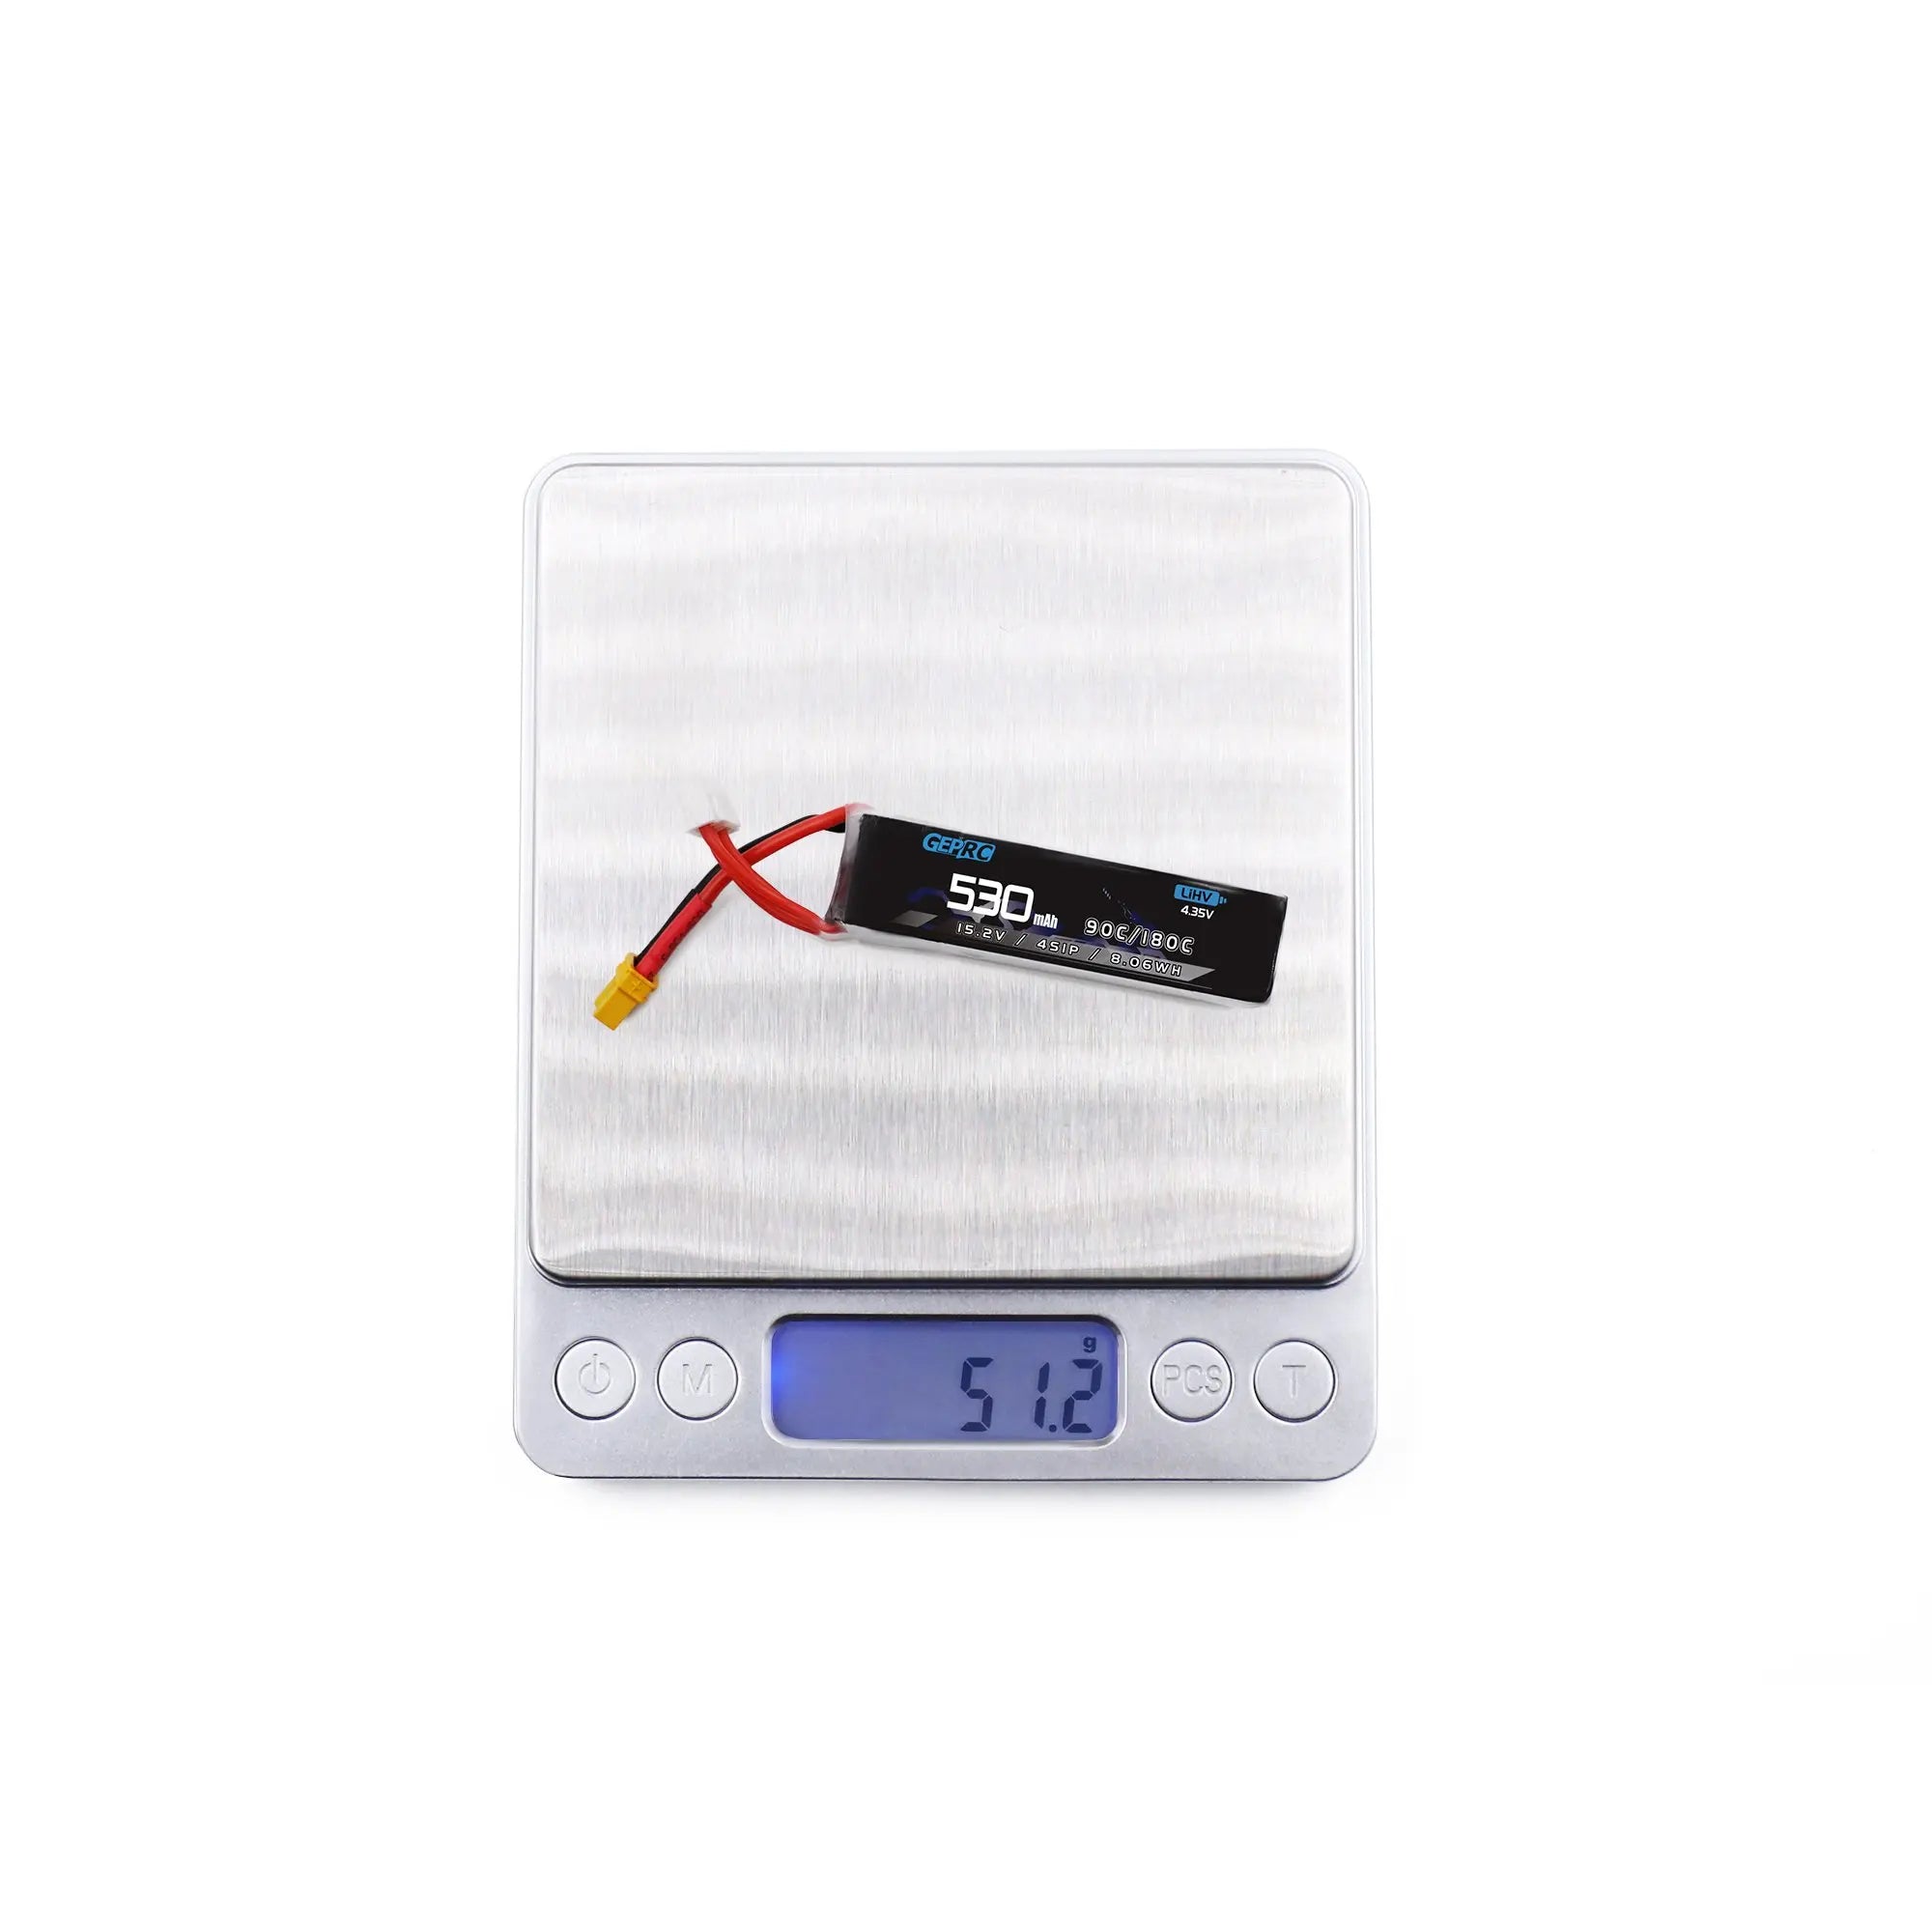 GEPRC 4S 530mAh LiPo Battery, don’t place the battery close to open flames or fire sources